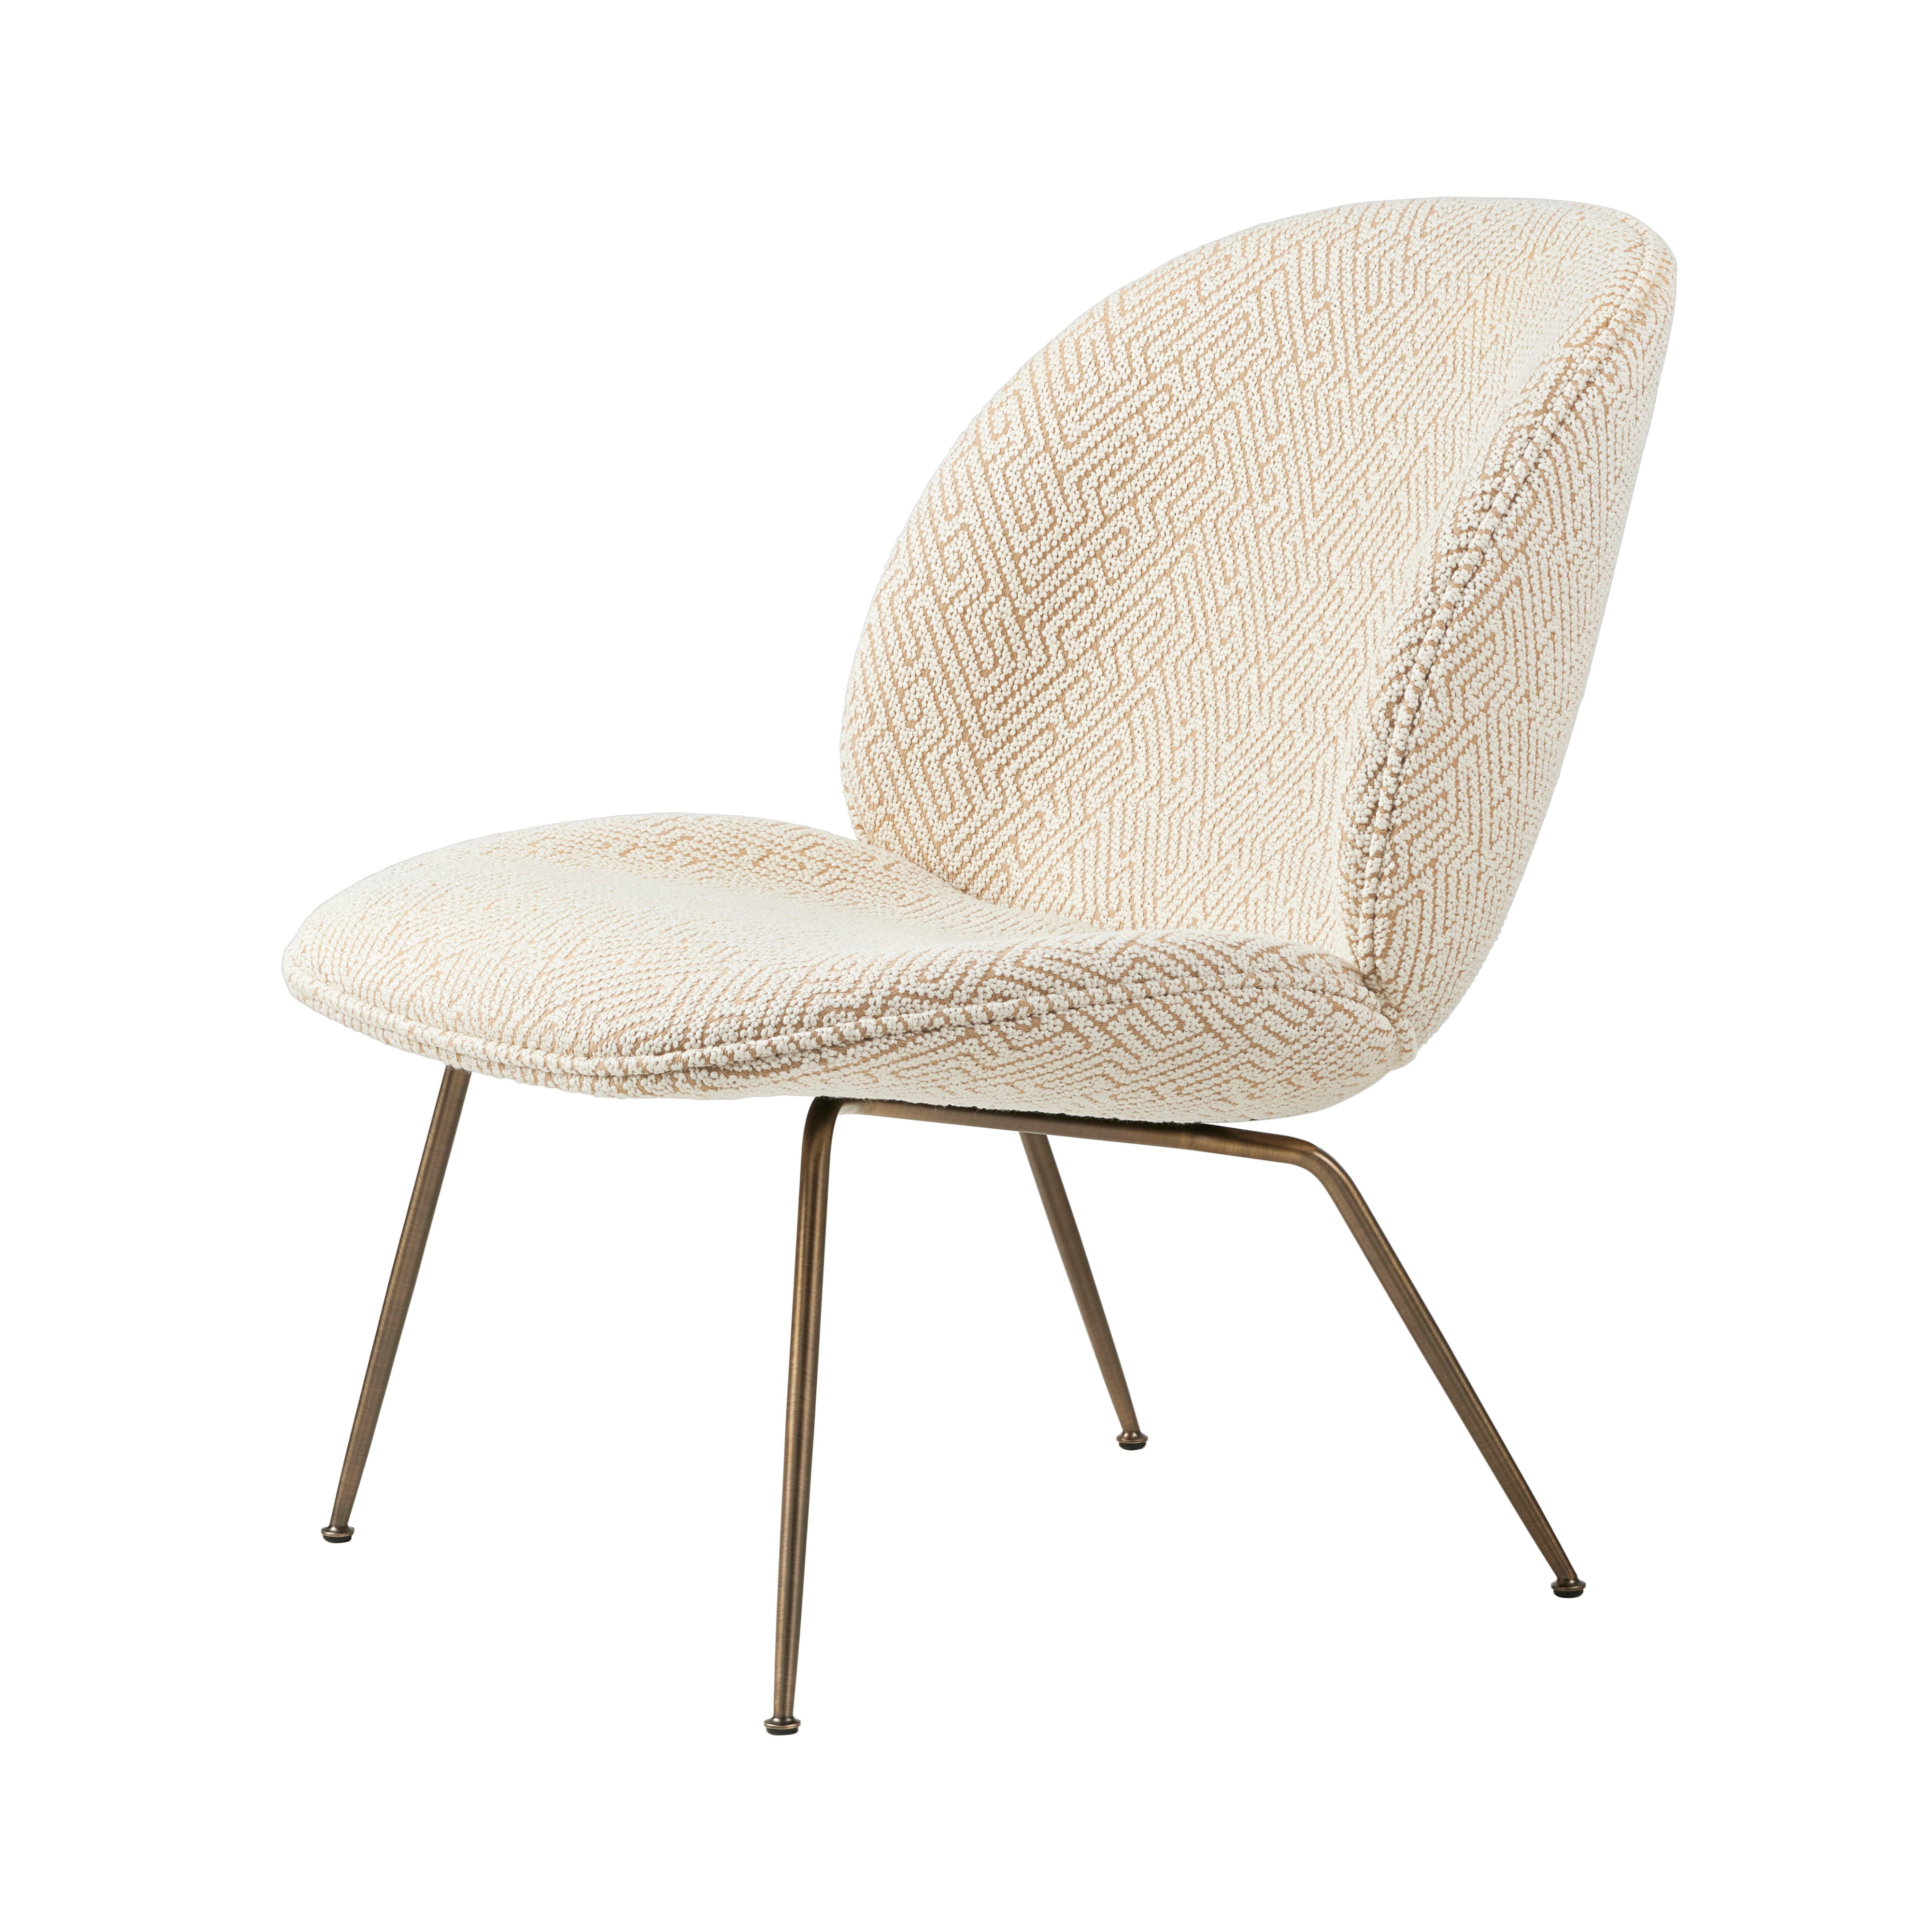 Beetle Lounge Chair: Conic Base + Full Upholstery + Antique Brass